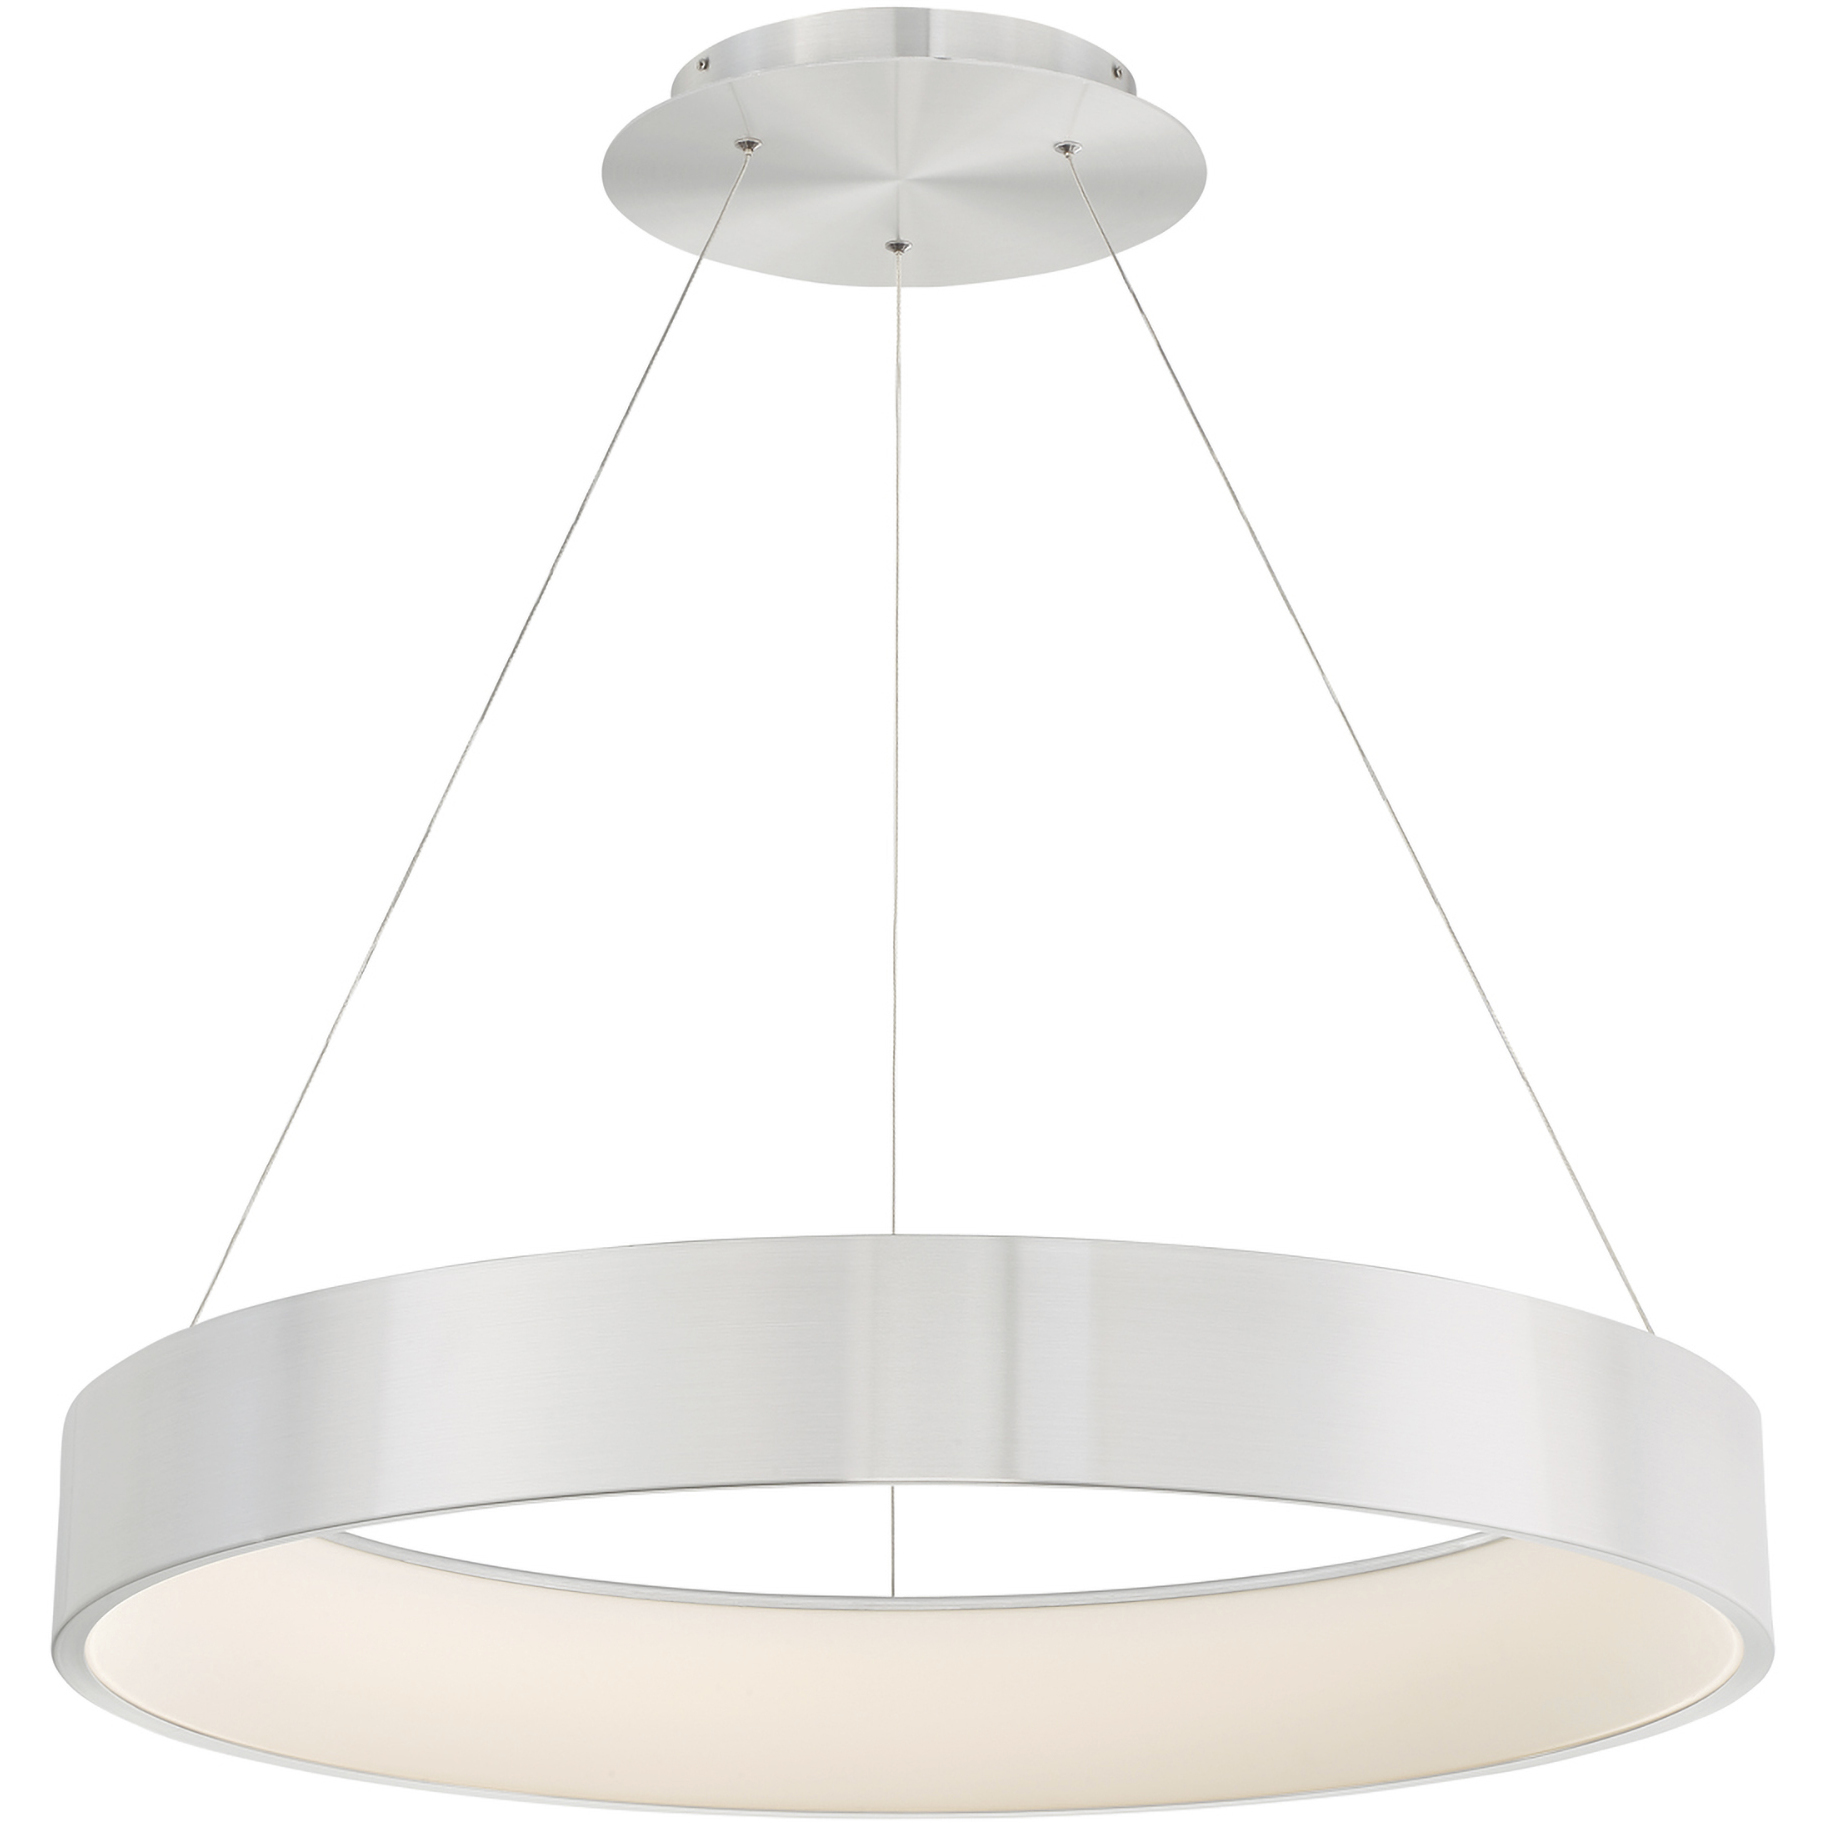 WAC Lighting PD-33732-AL Corso LED 32 inch Brushed Aluminum Pendant Ceiling  Light in 32in, dweLED